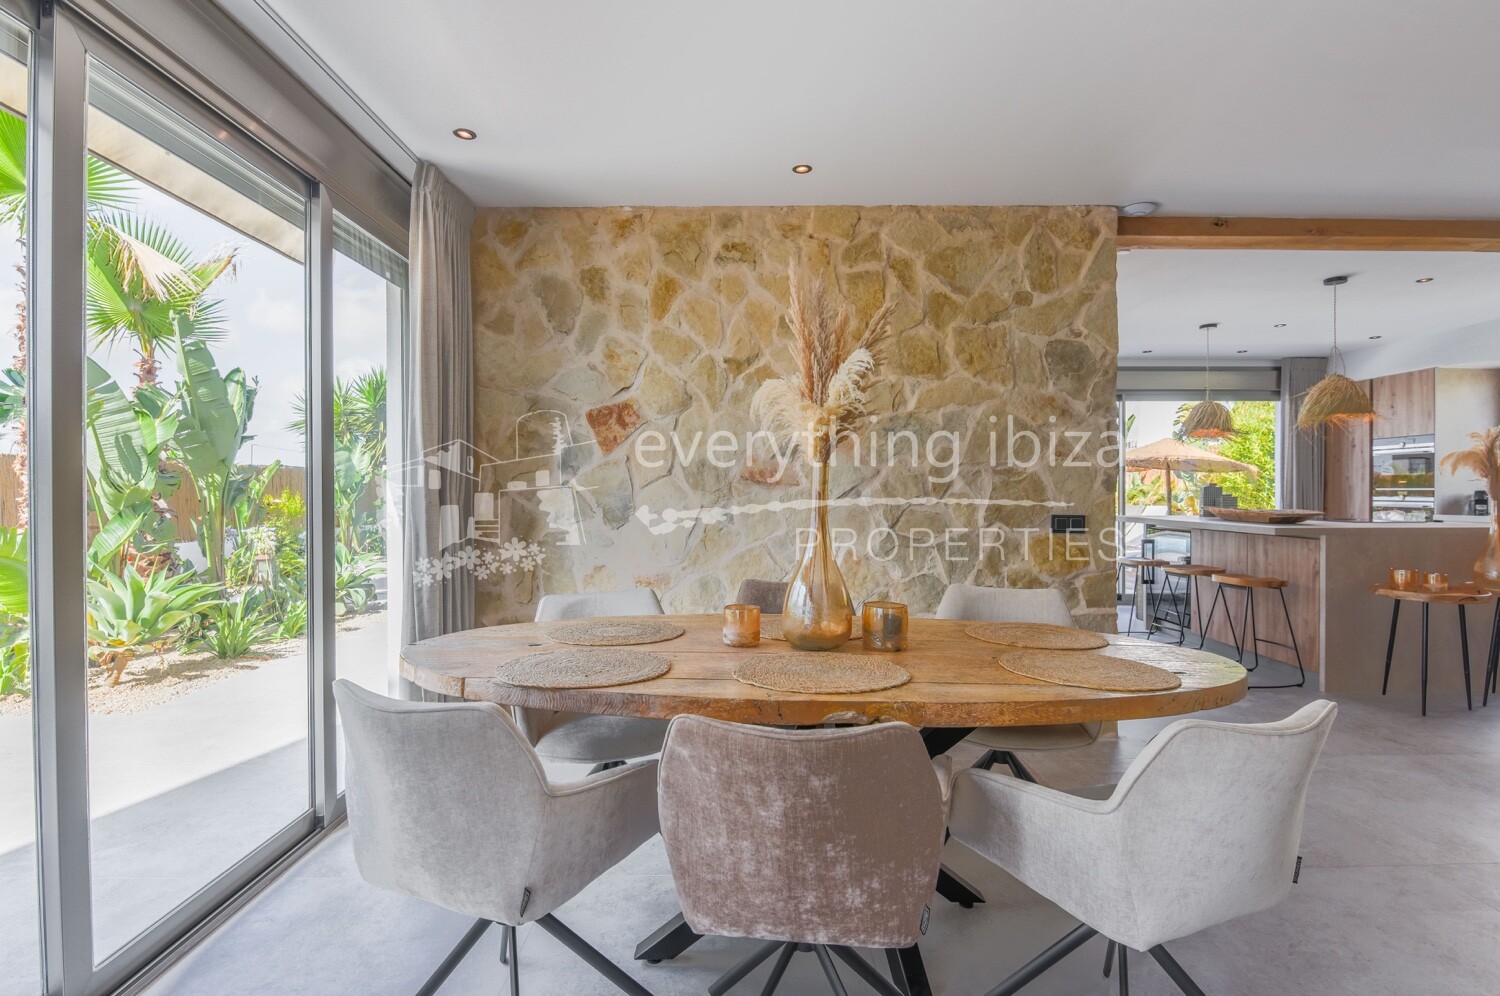 Magnificent Modern Villa in Super Location with Tourist License, ref. 1618, for sale in Ibiza by everything ibiza Properties